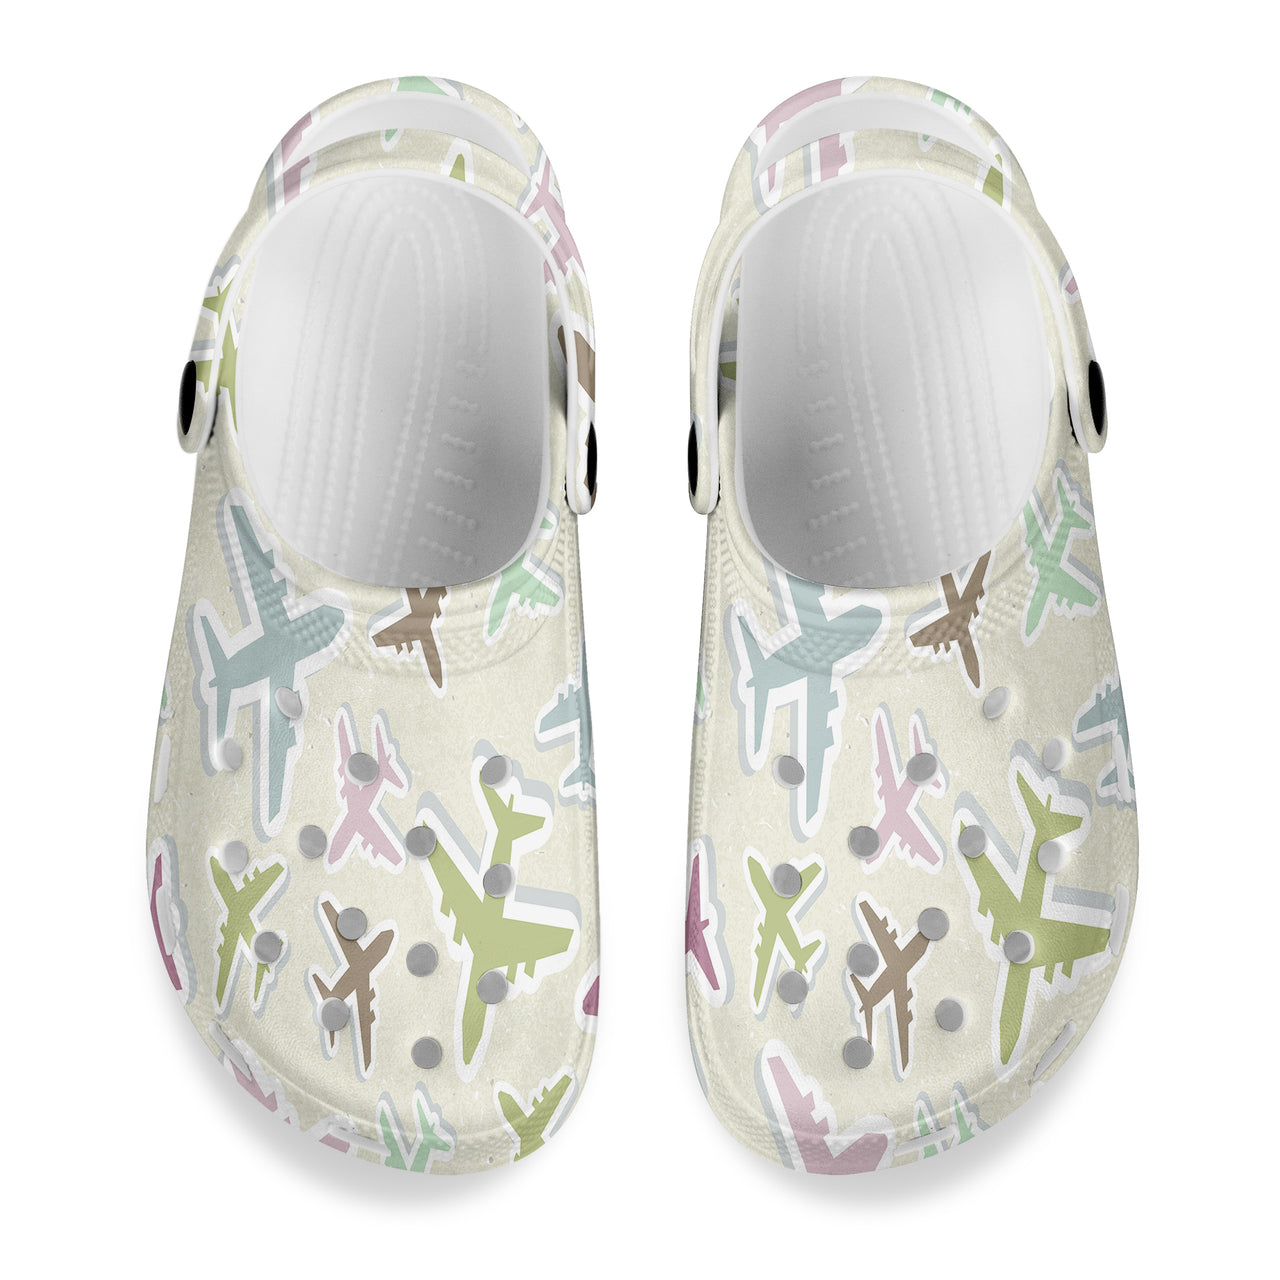 Seamless 3D Airplanes Designed Hole Shoes & Slippers (WOMEN)